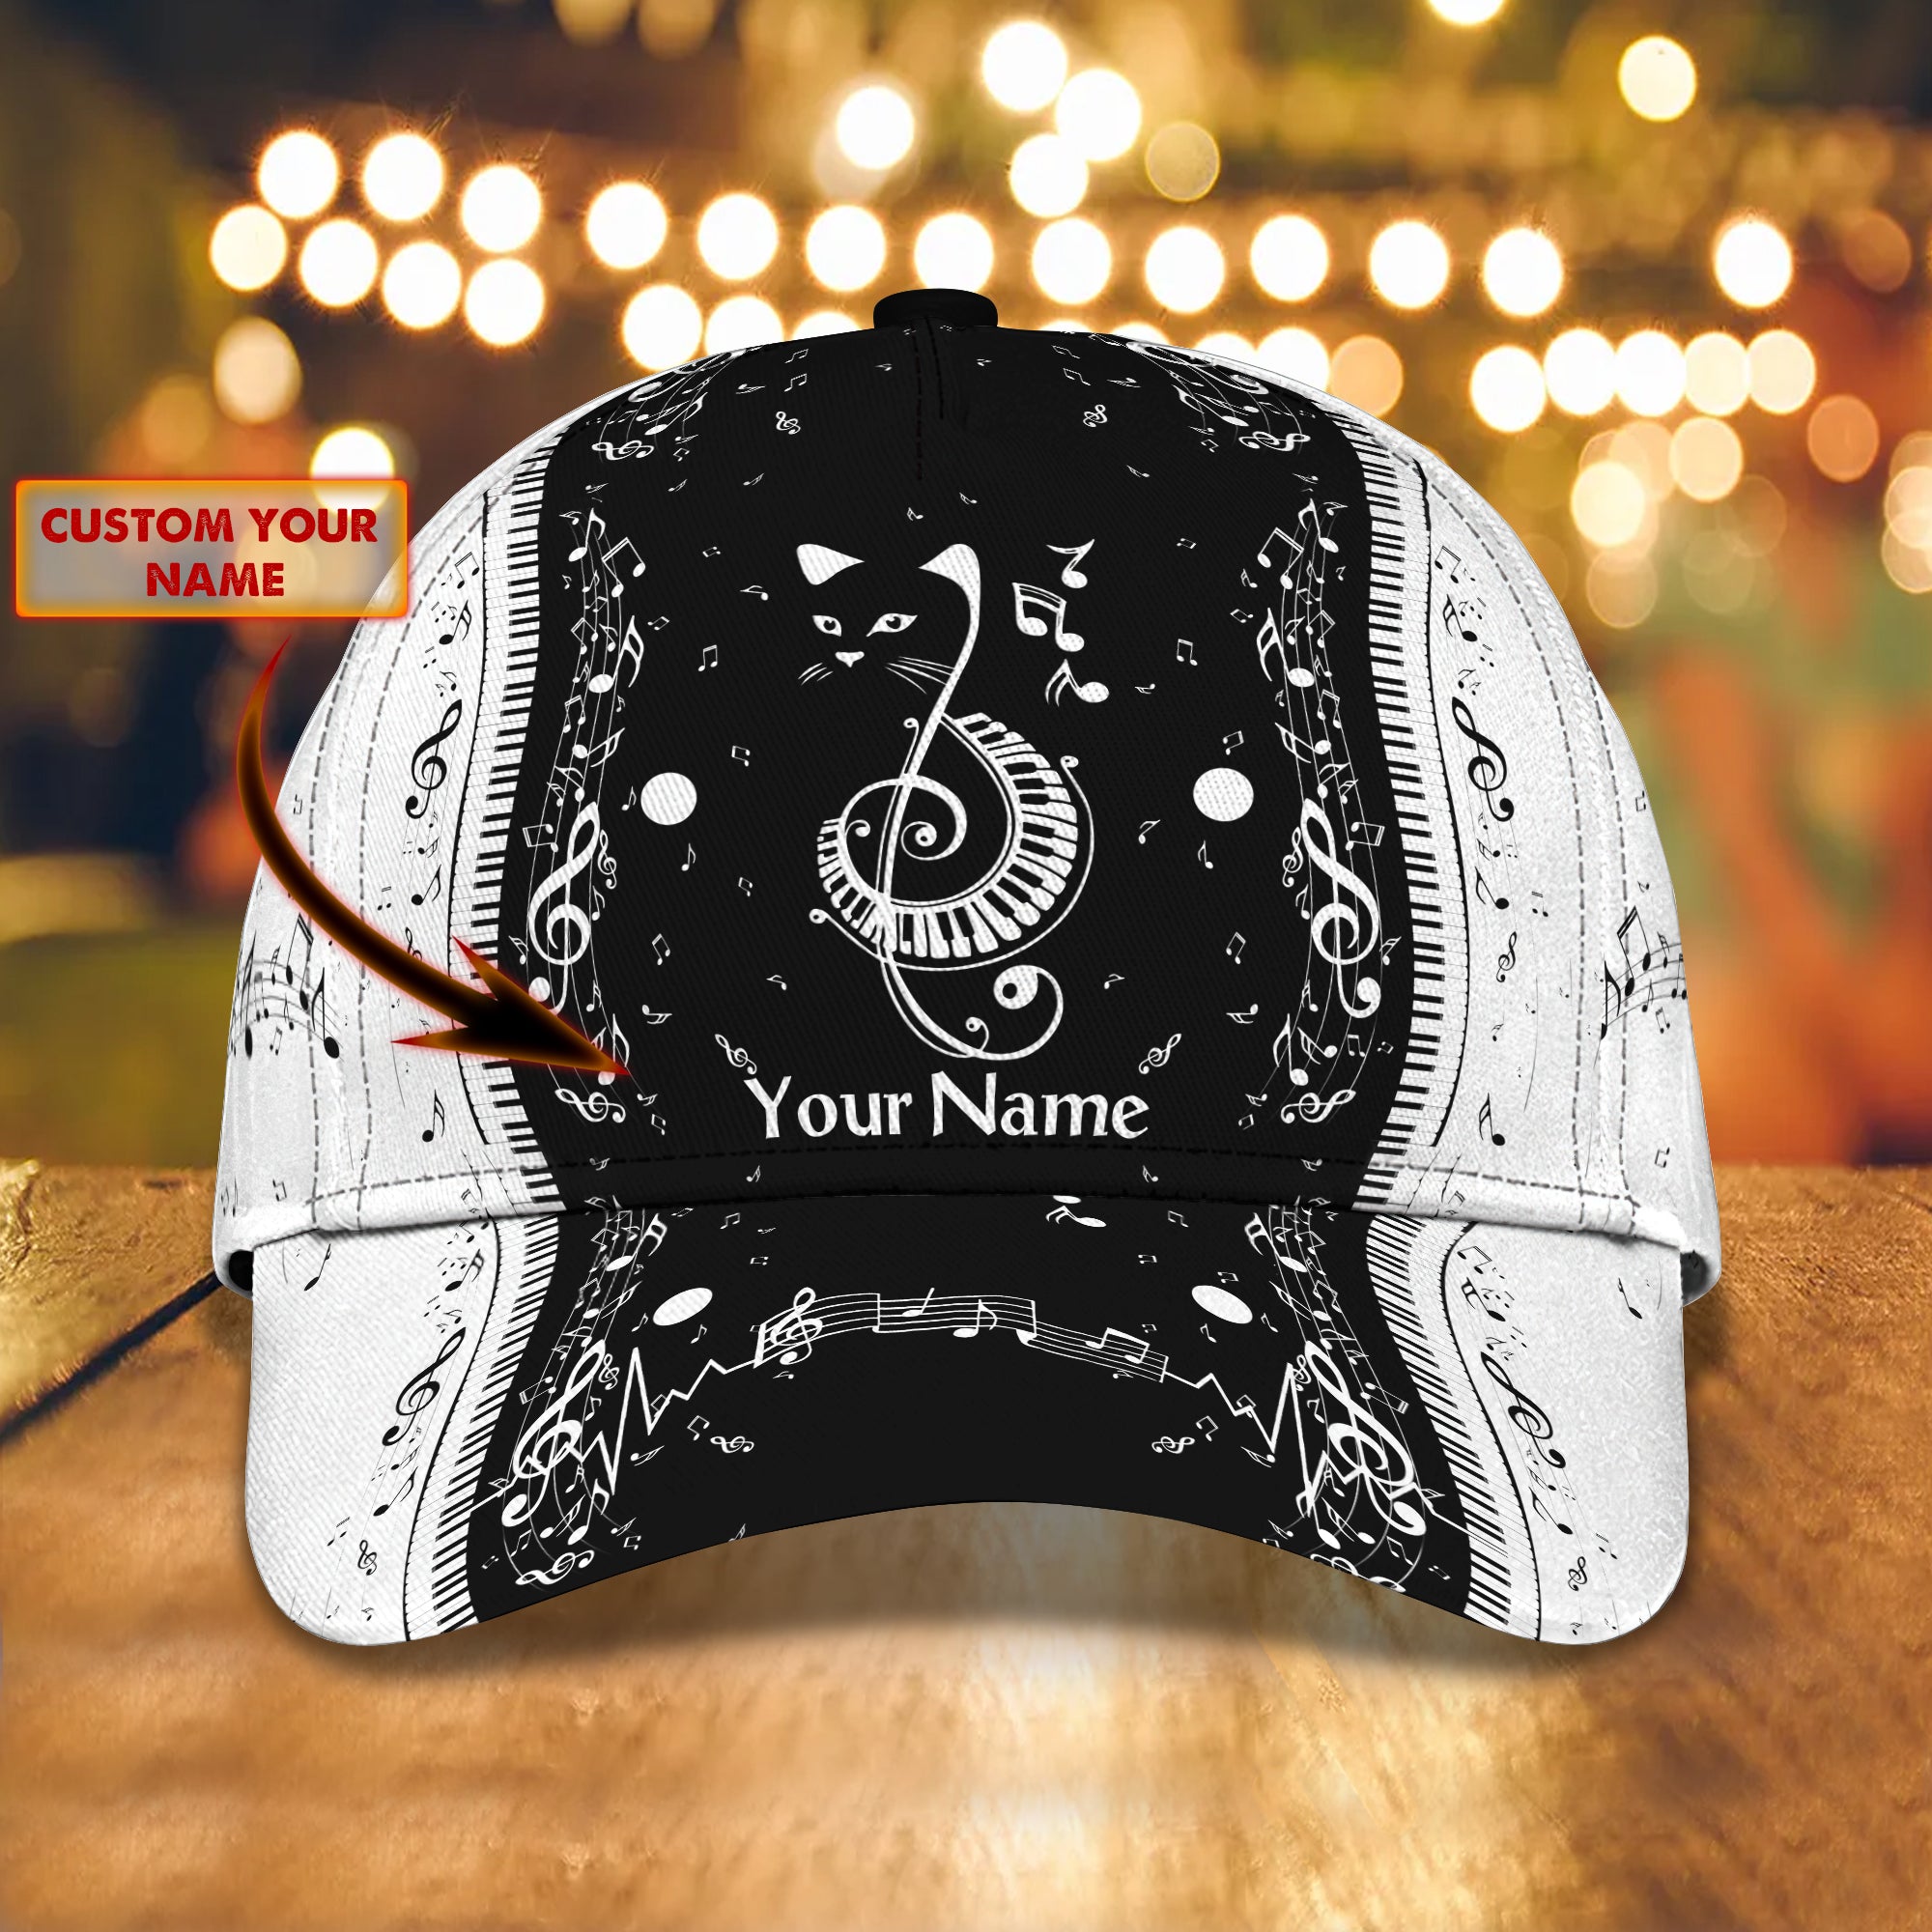 PIANO1 - Personalized Name Cap - BY97